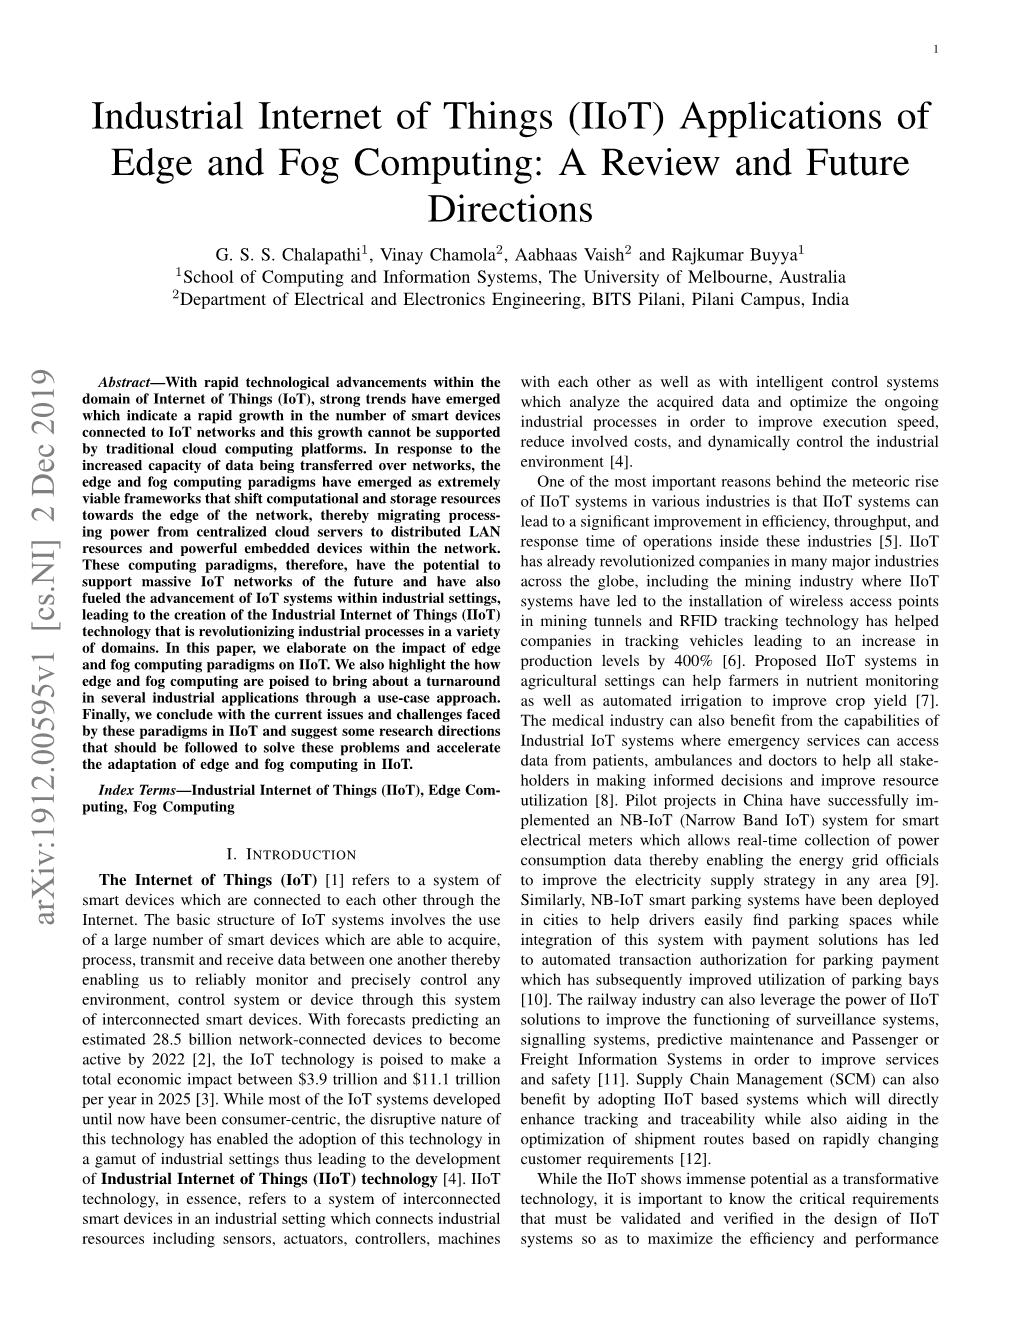 (Iiot) Applications of Edge and Fog Computing: a Review and Future Directions G